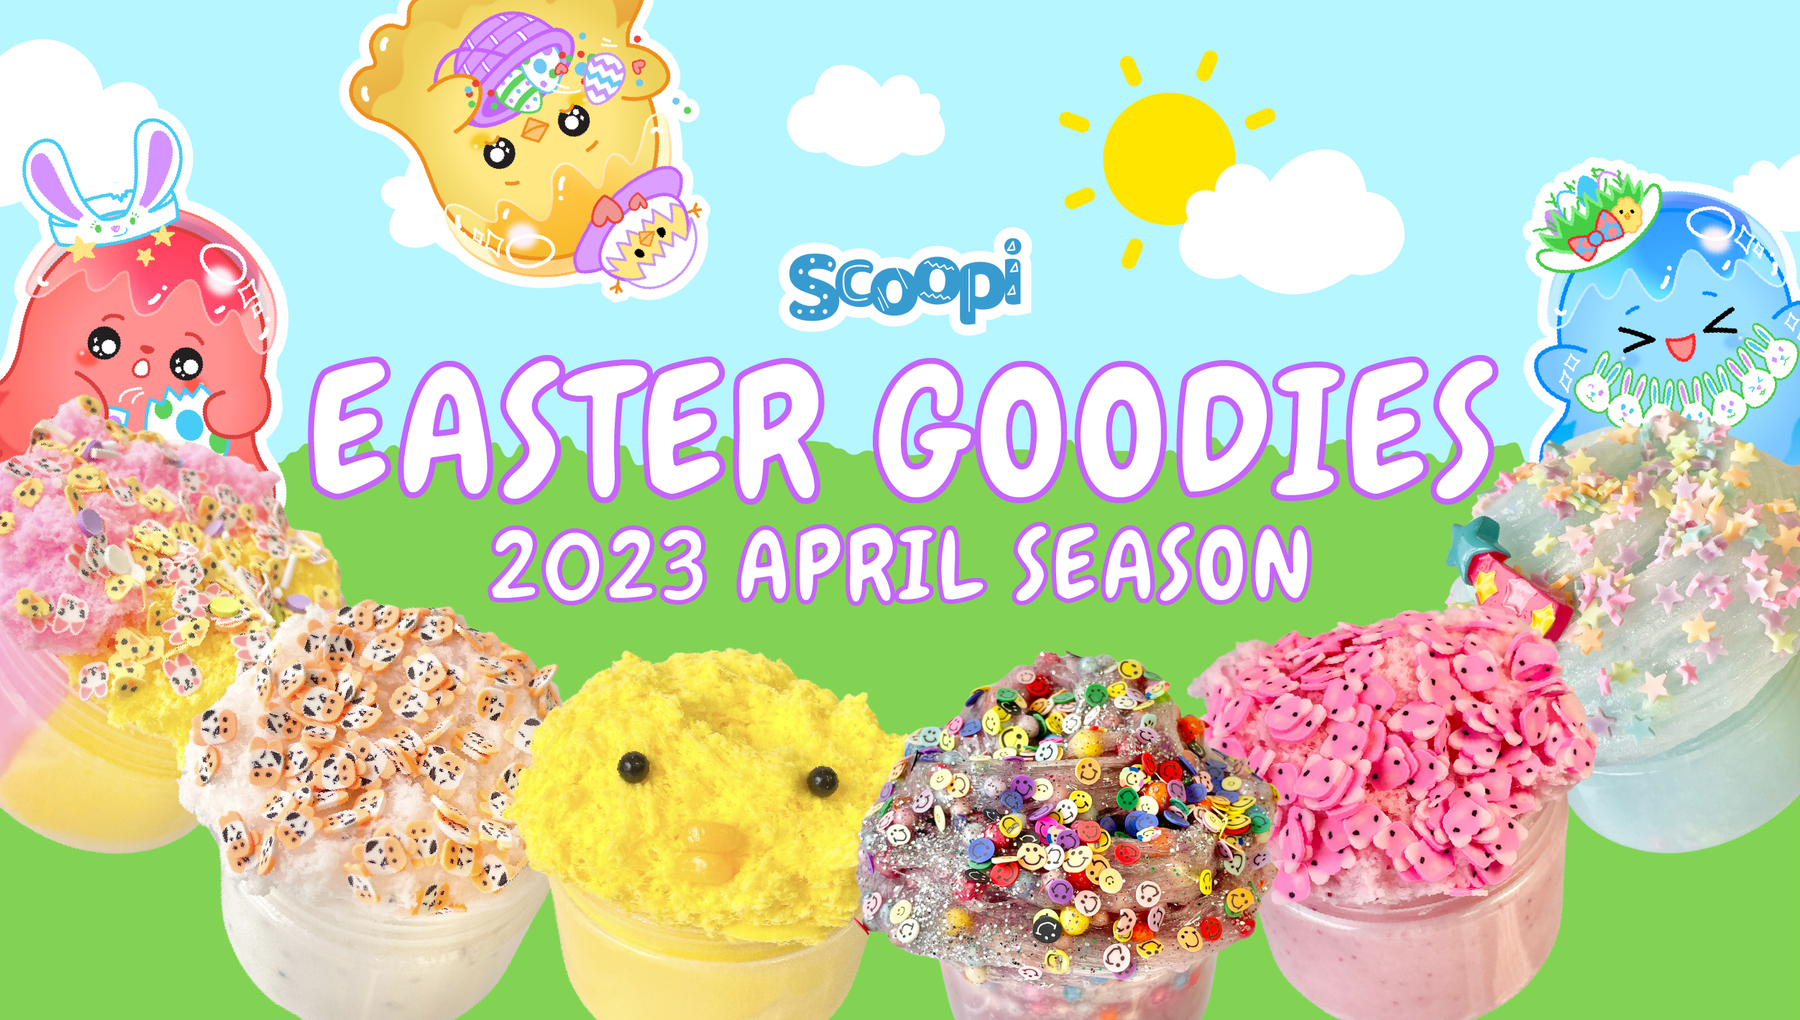 Scoopi’s Easter Goodies